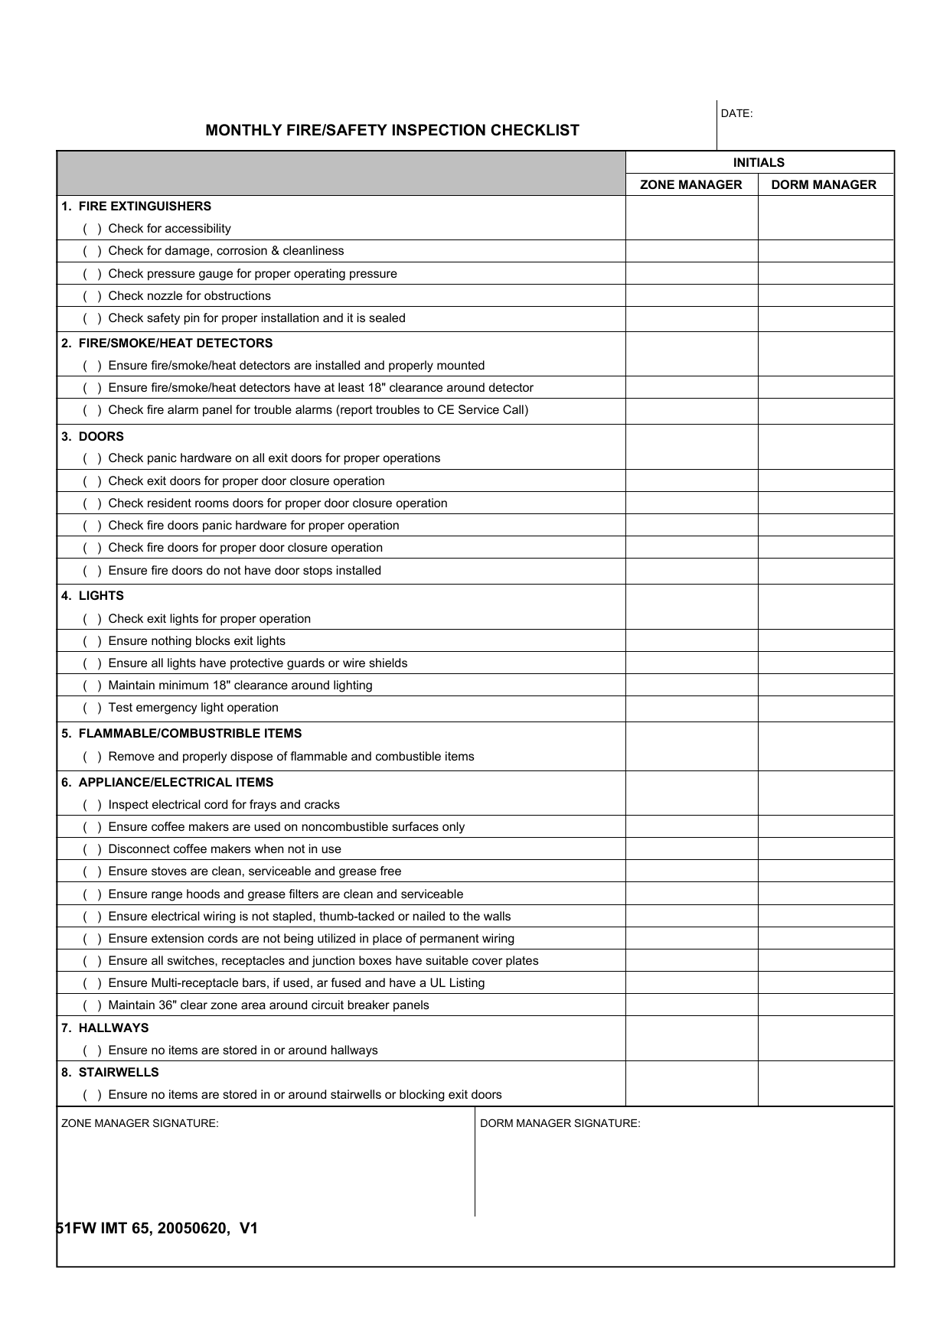 51 FW IMT Form 65 Monthly Fire / Safety Inspection Checklist, Page 1